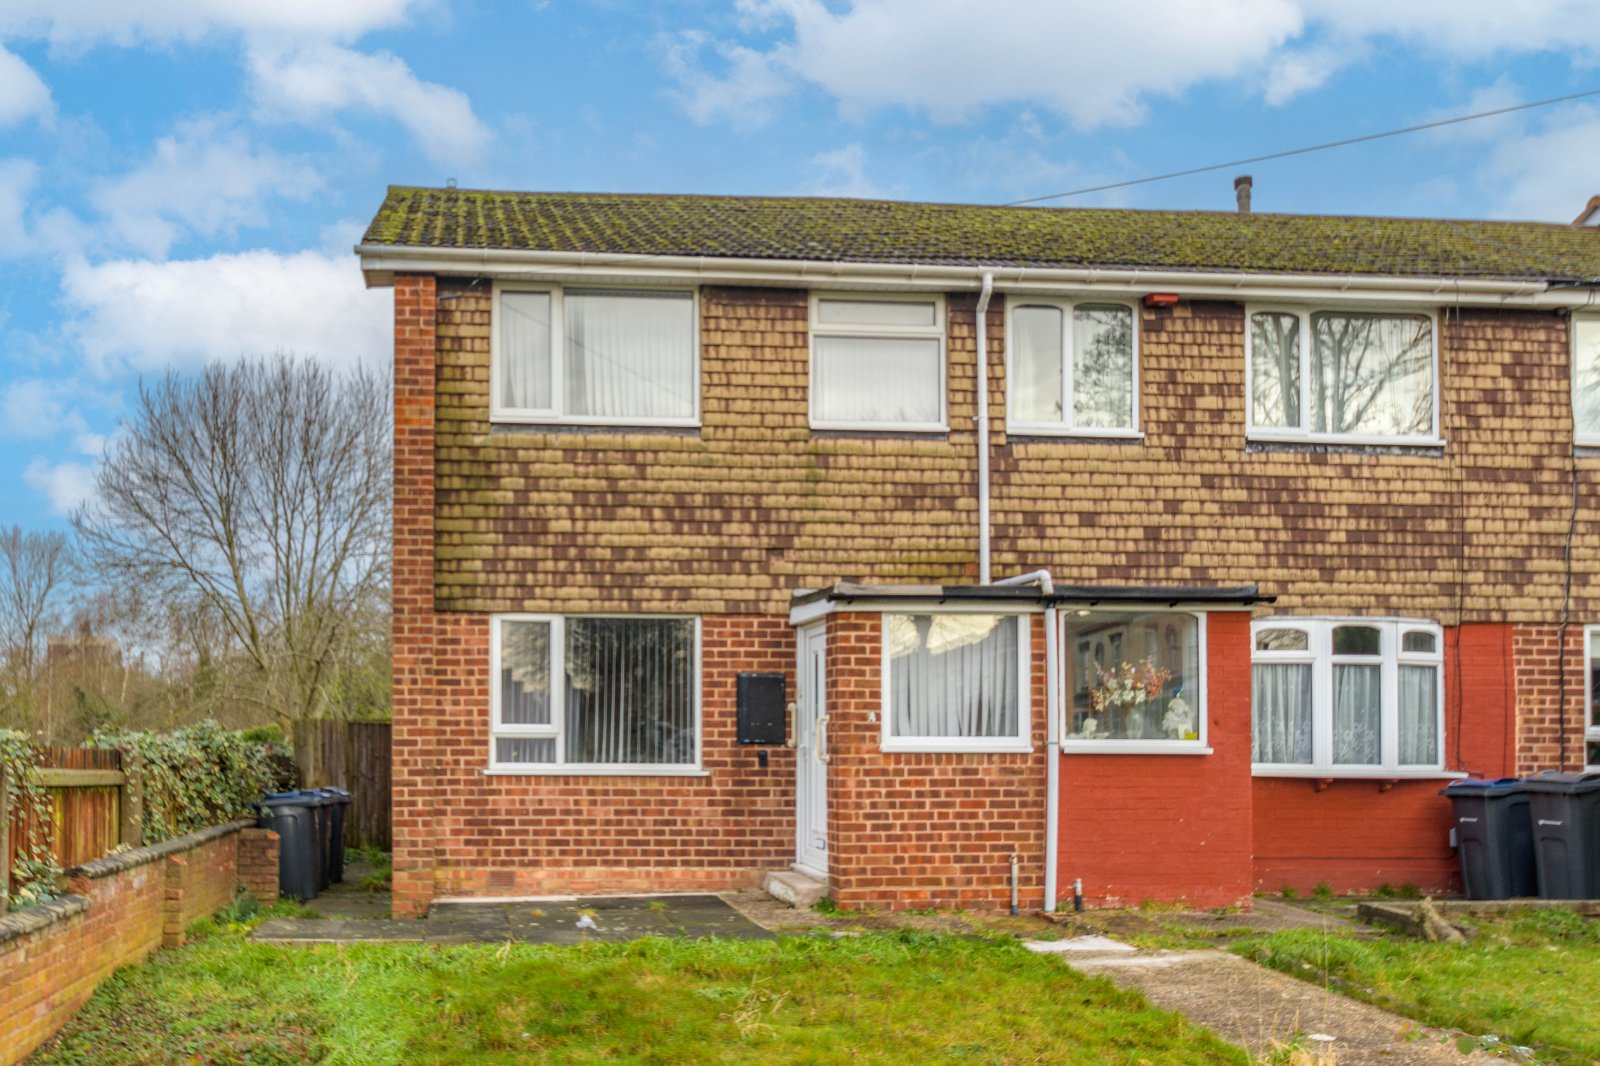 3 bed house to rent in Frederick Road, Stechford - Property Image 1